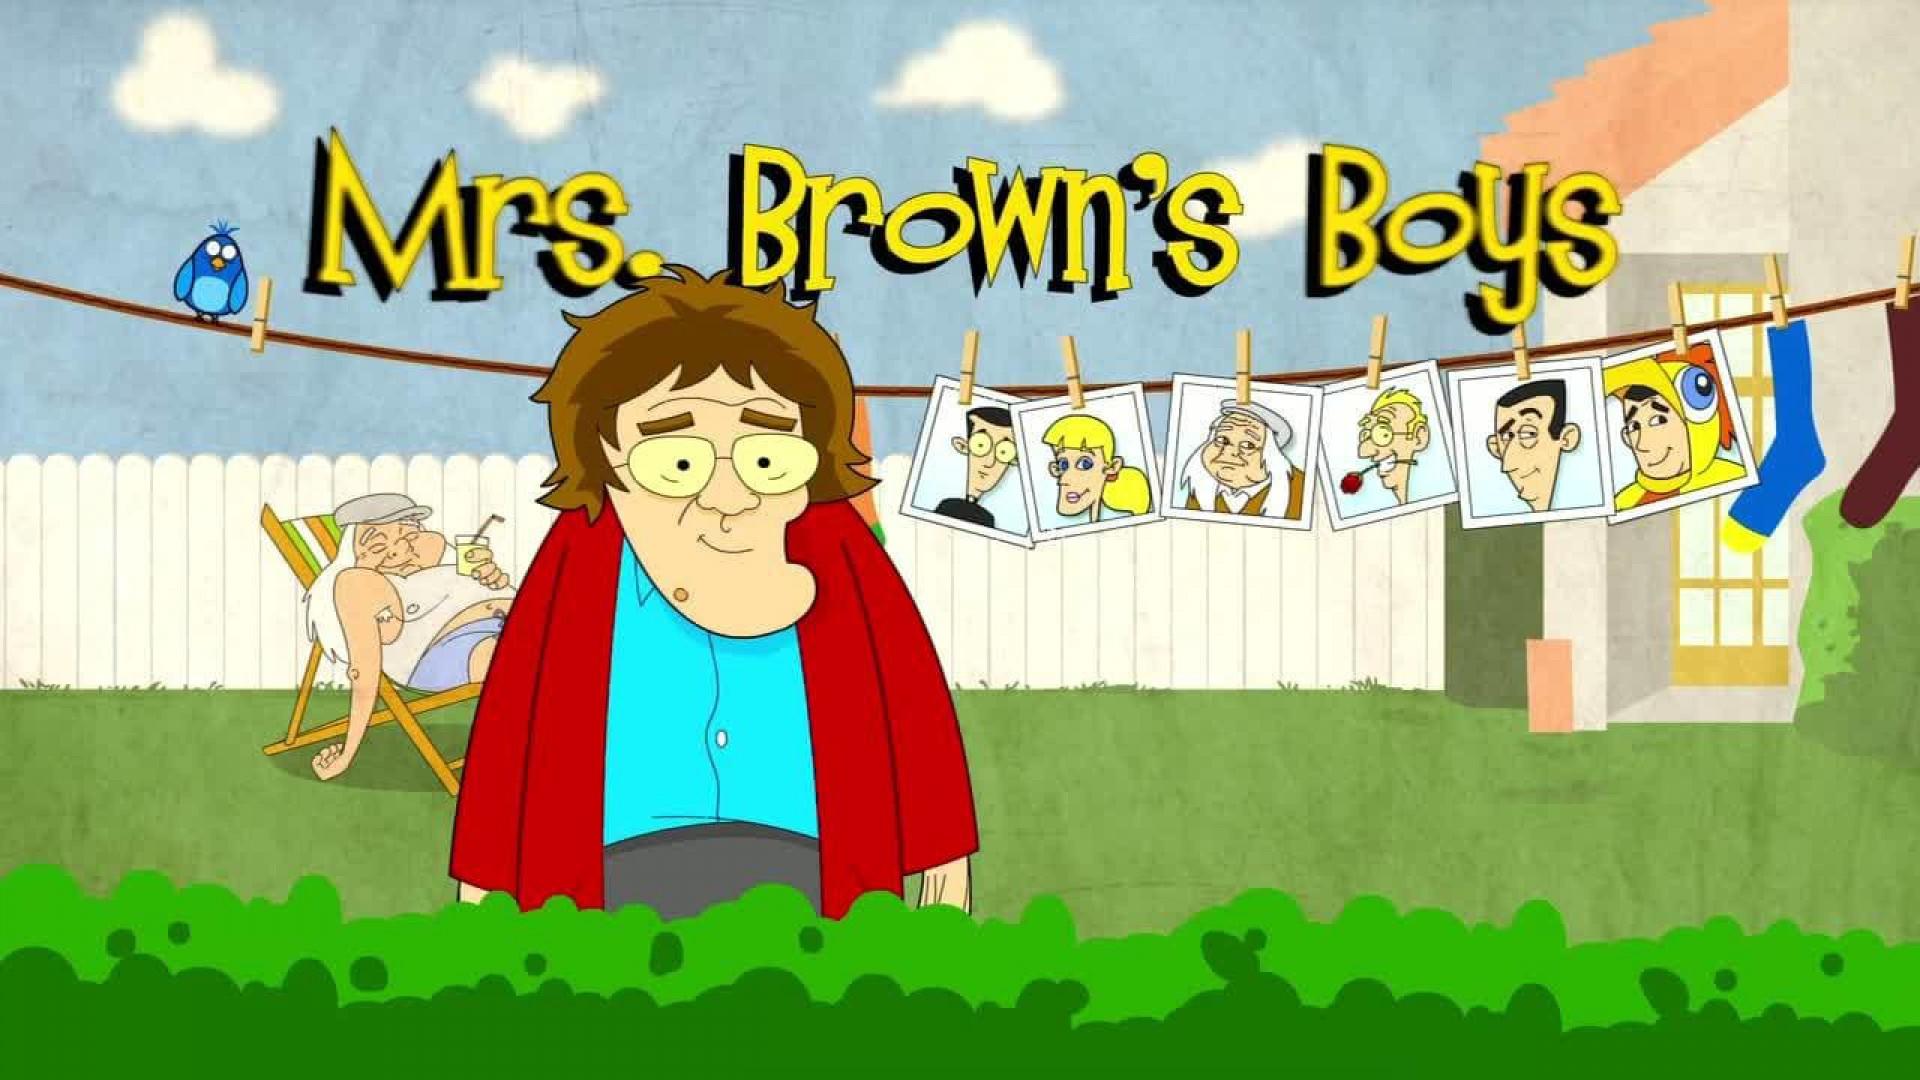 Mrs. Brown's Bloomers